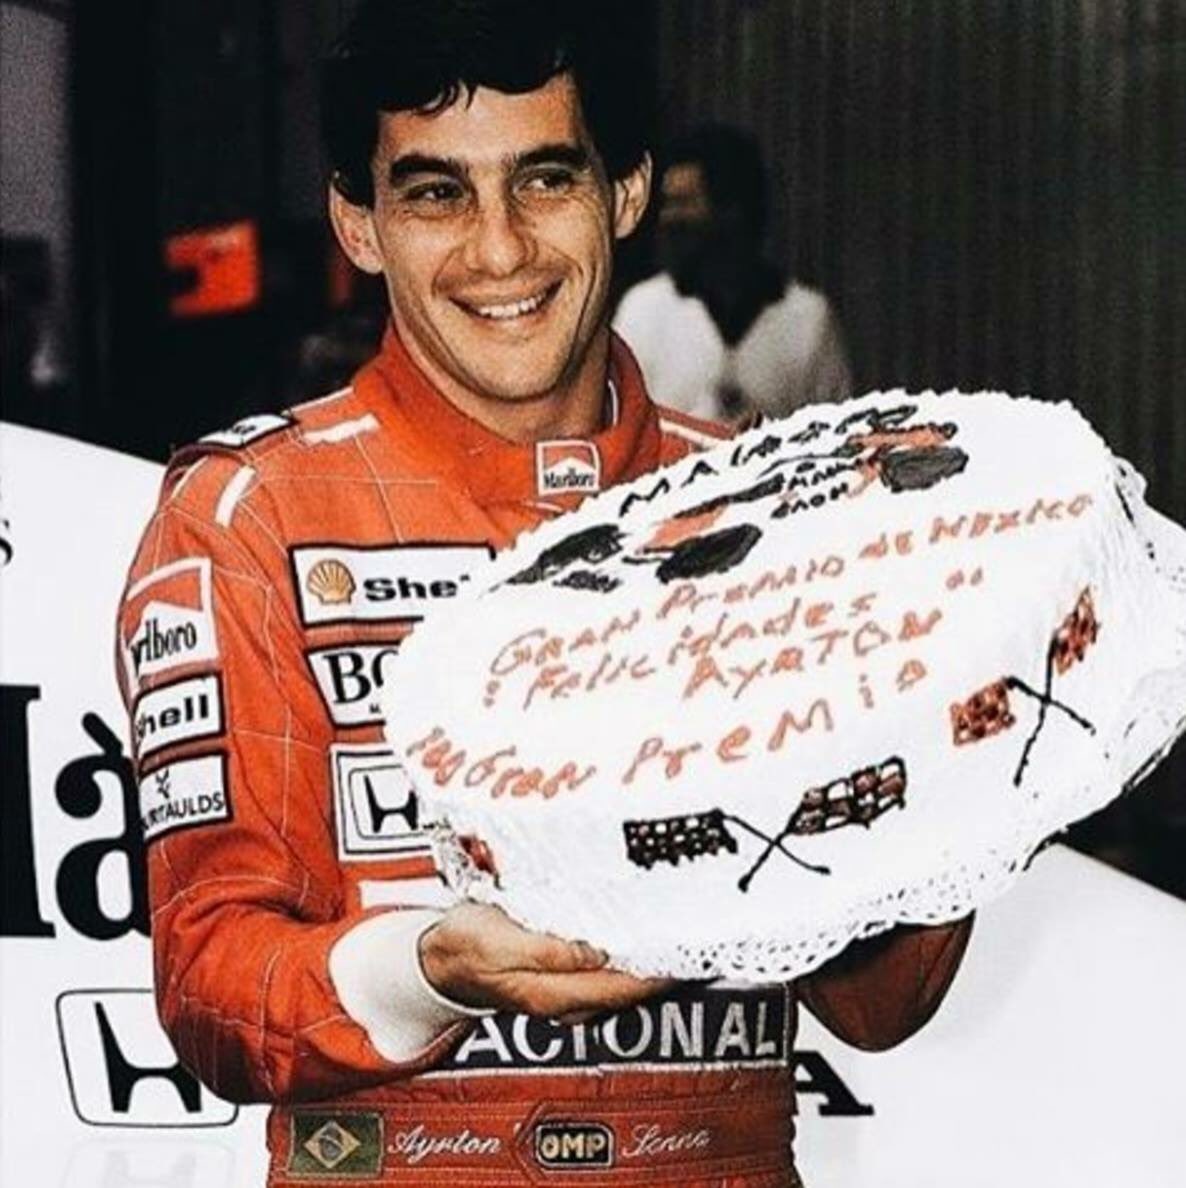 Happy birthday to the greatest driver to ever live Ayrton Senna   